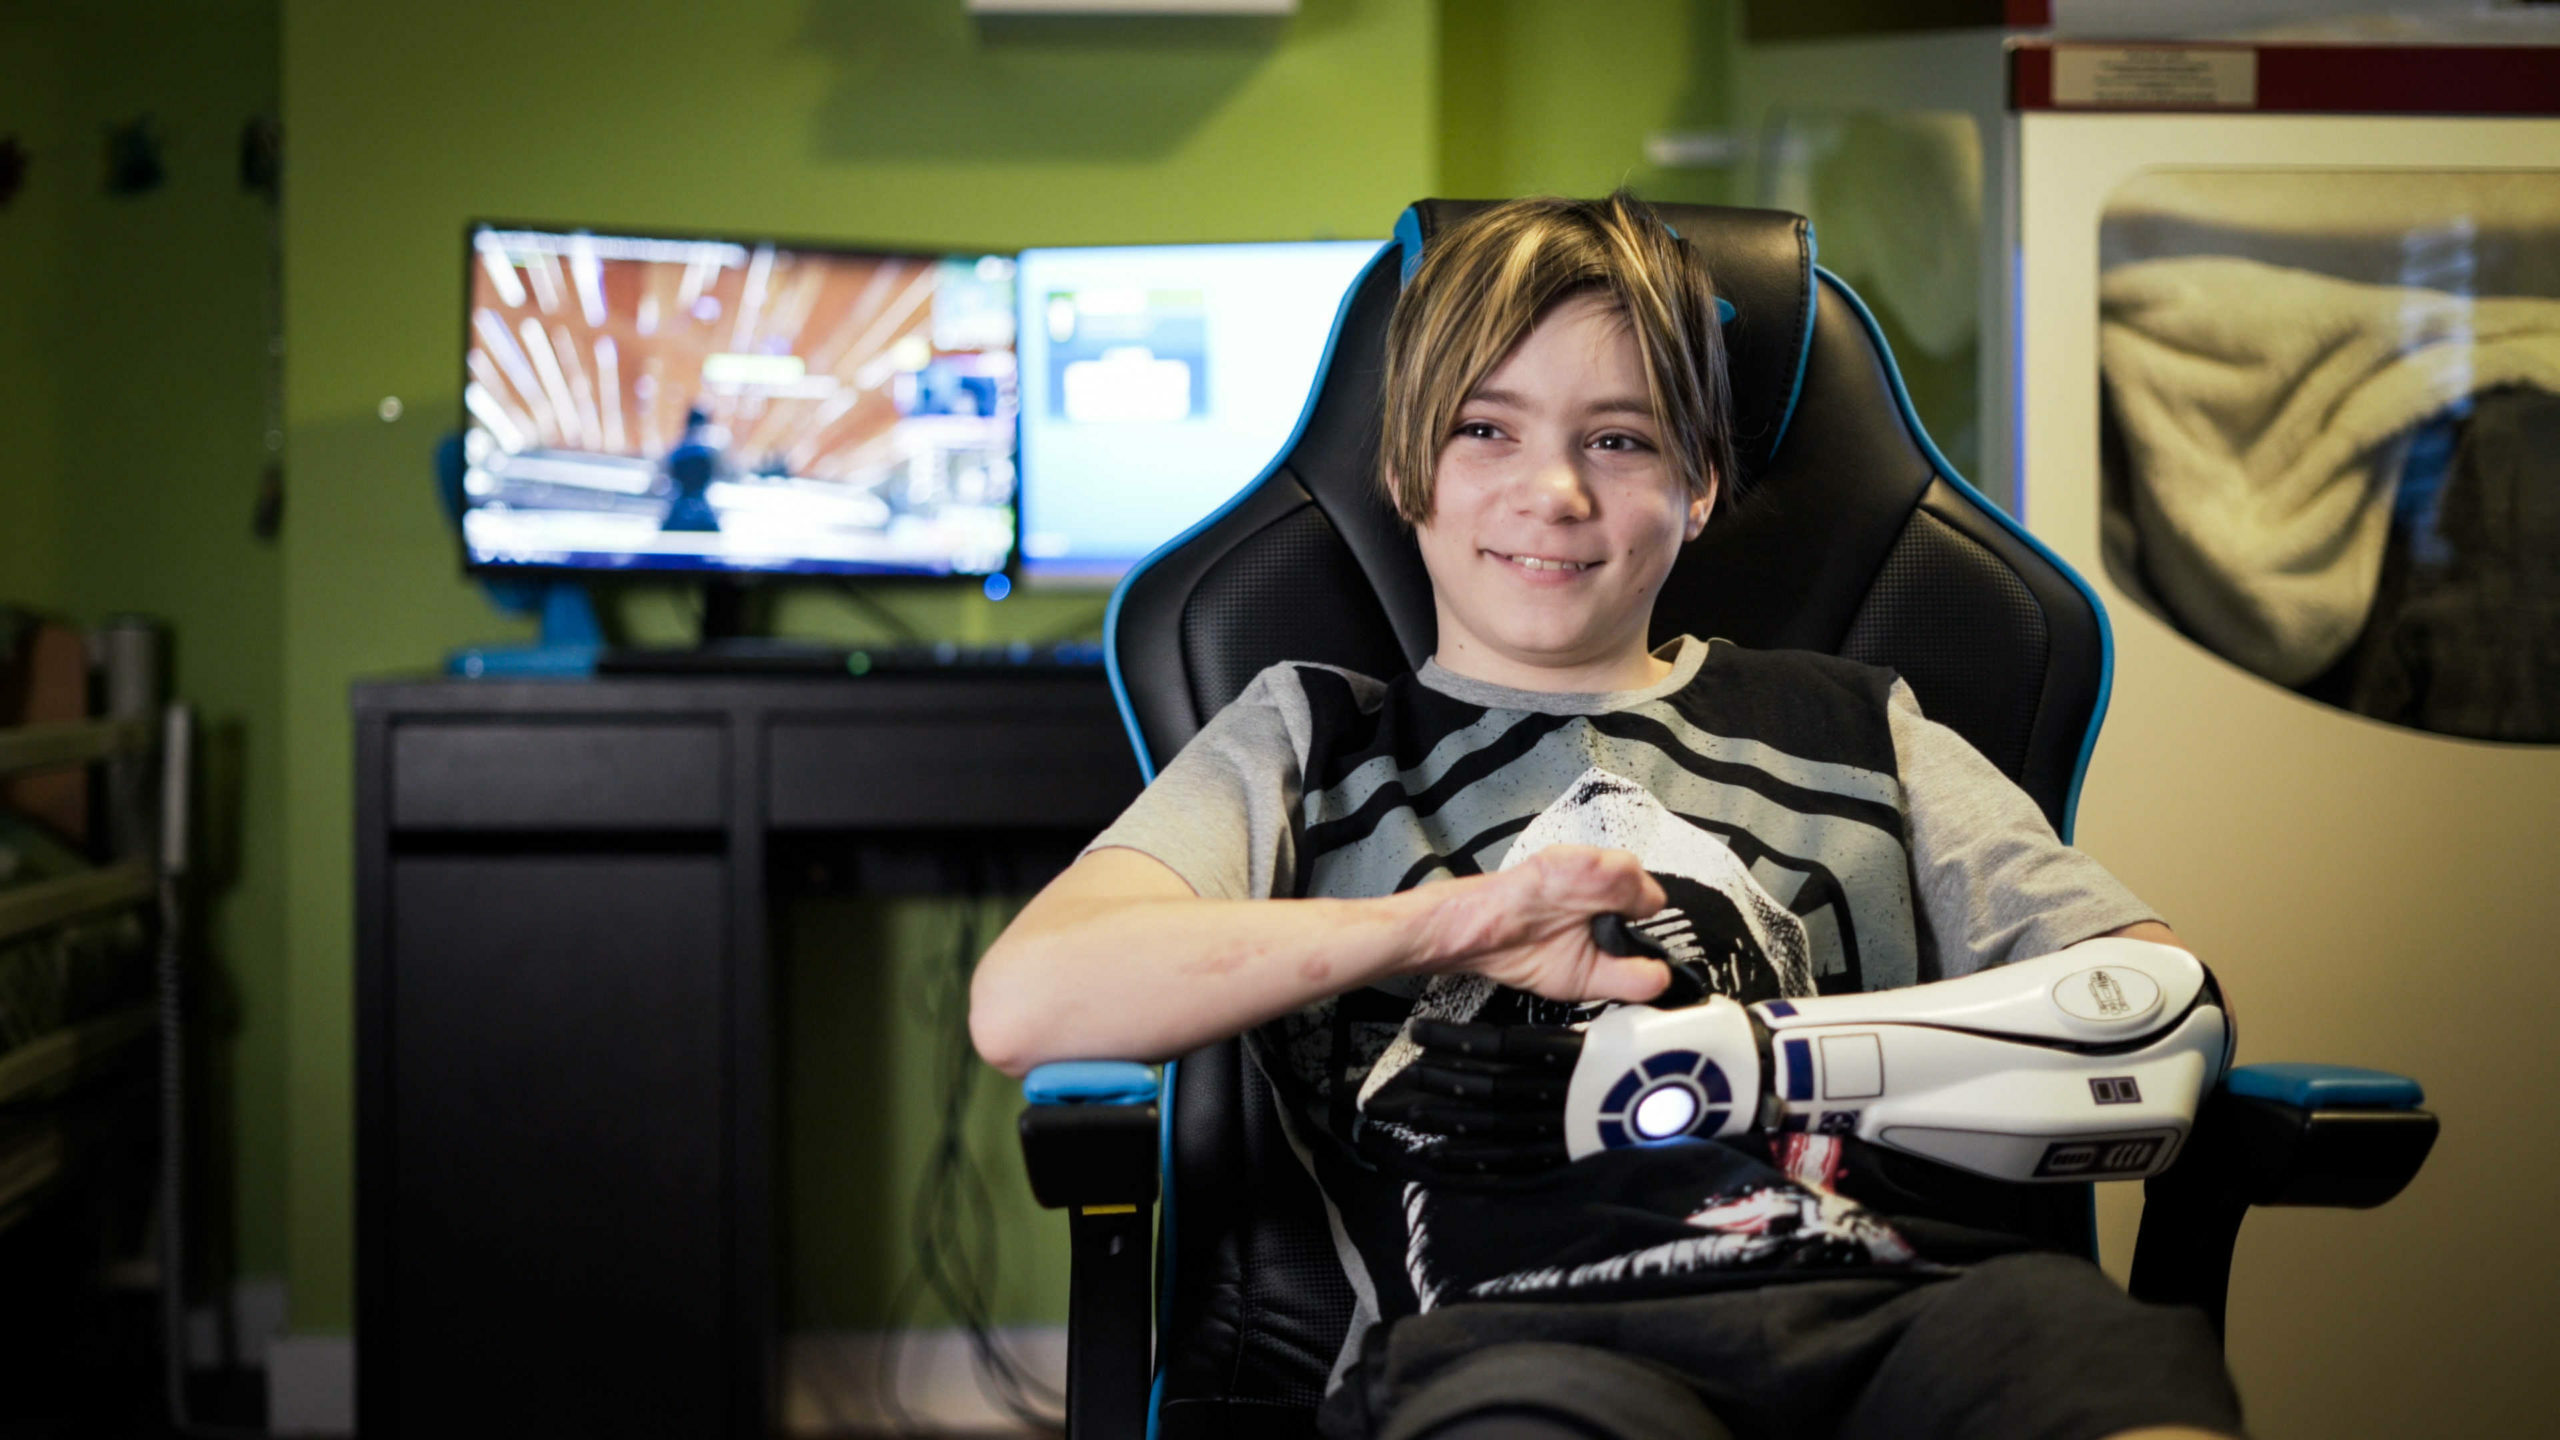 first child in the world to wear Star Wars 3d printed prosthetic arm